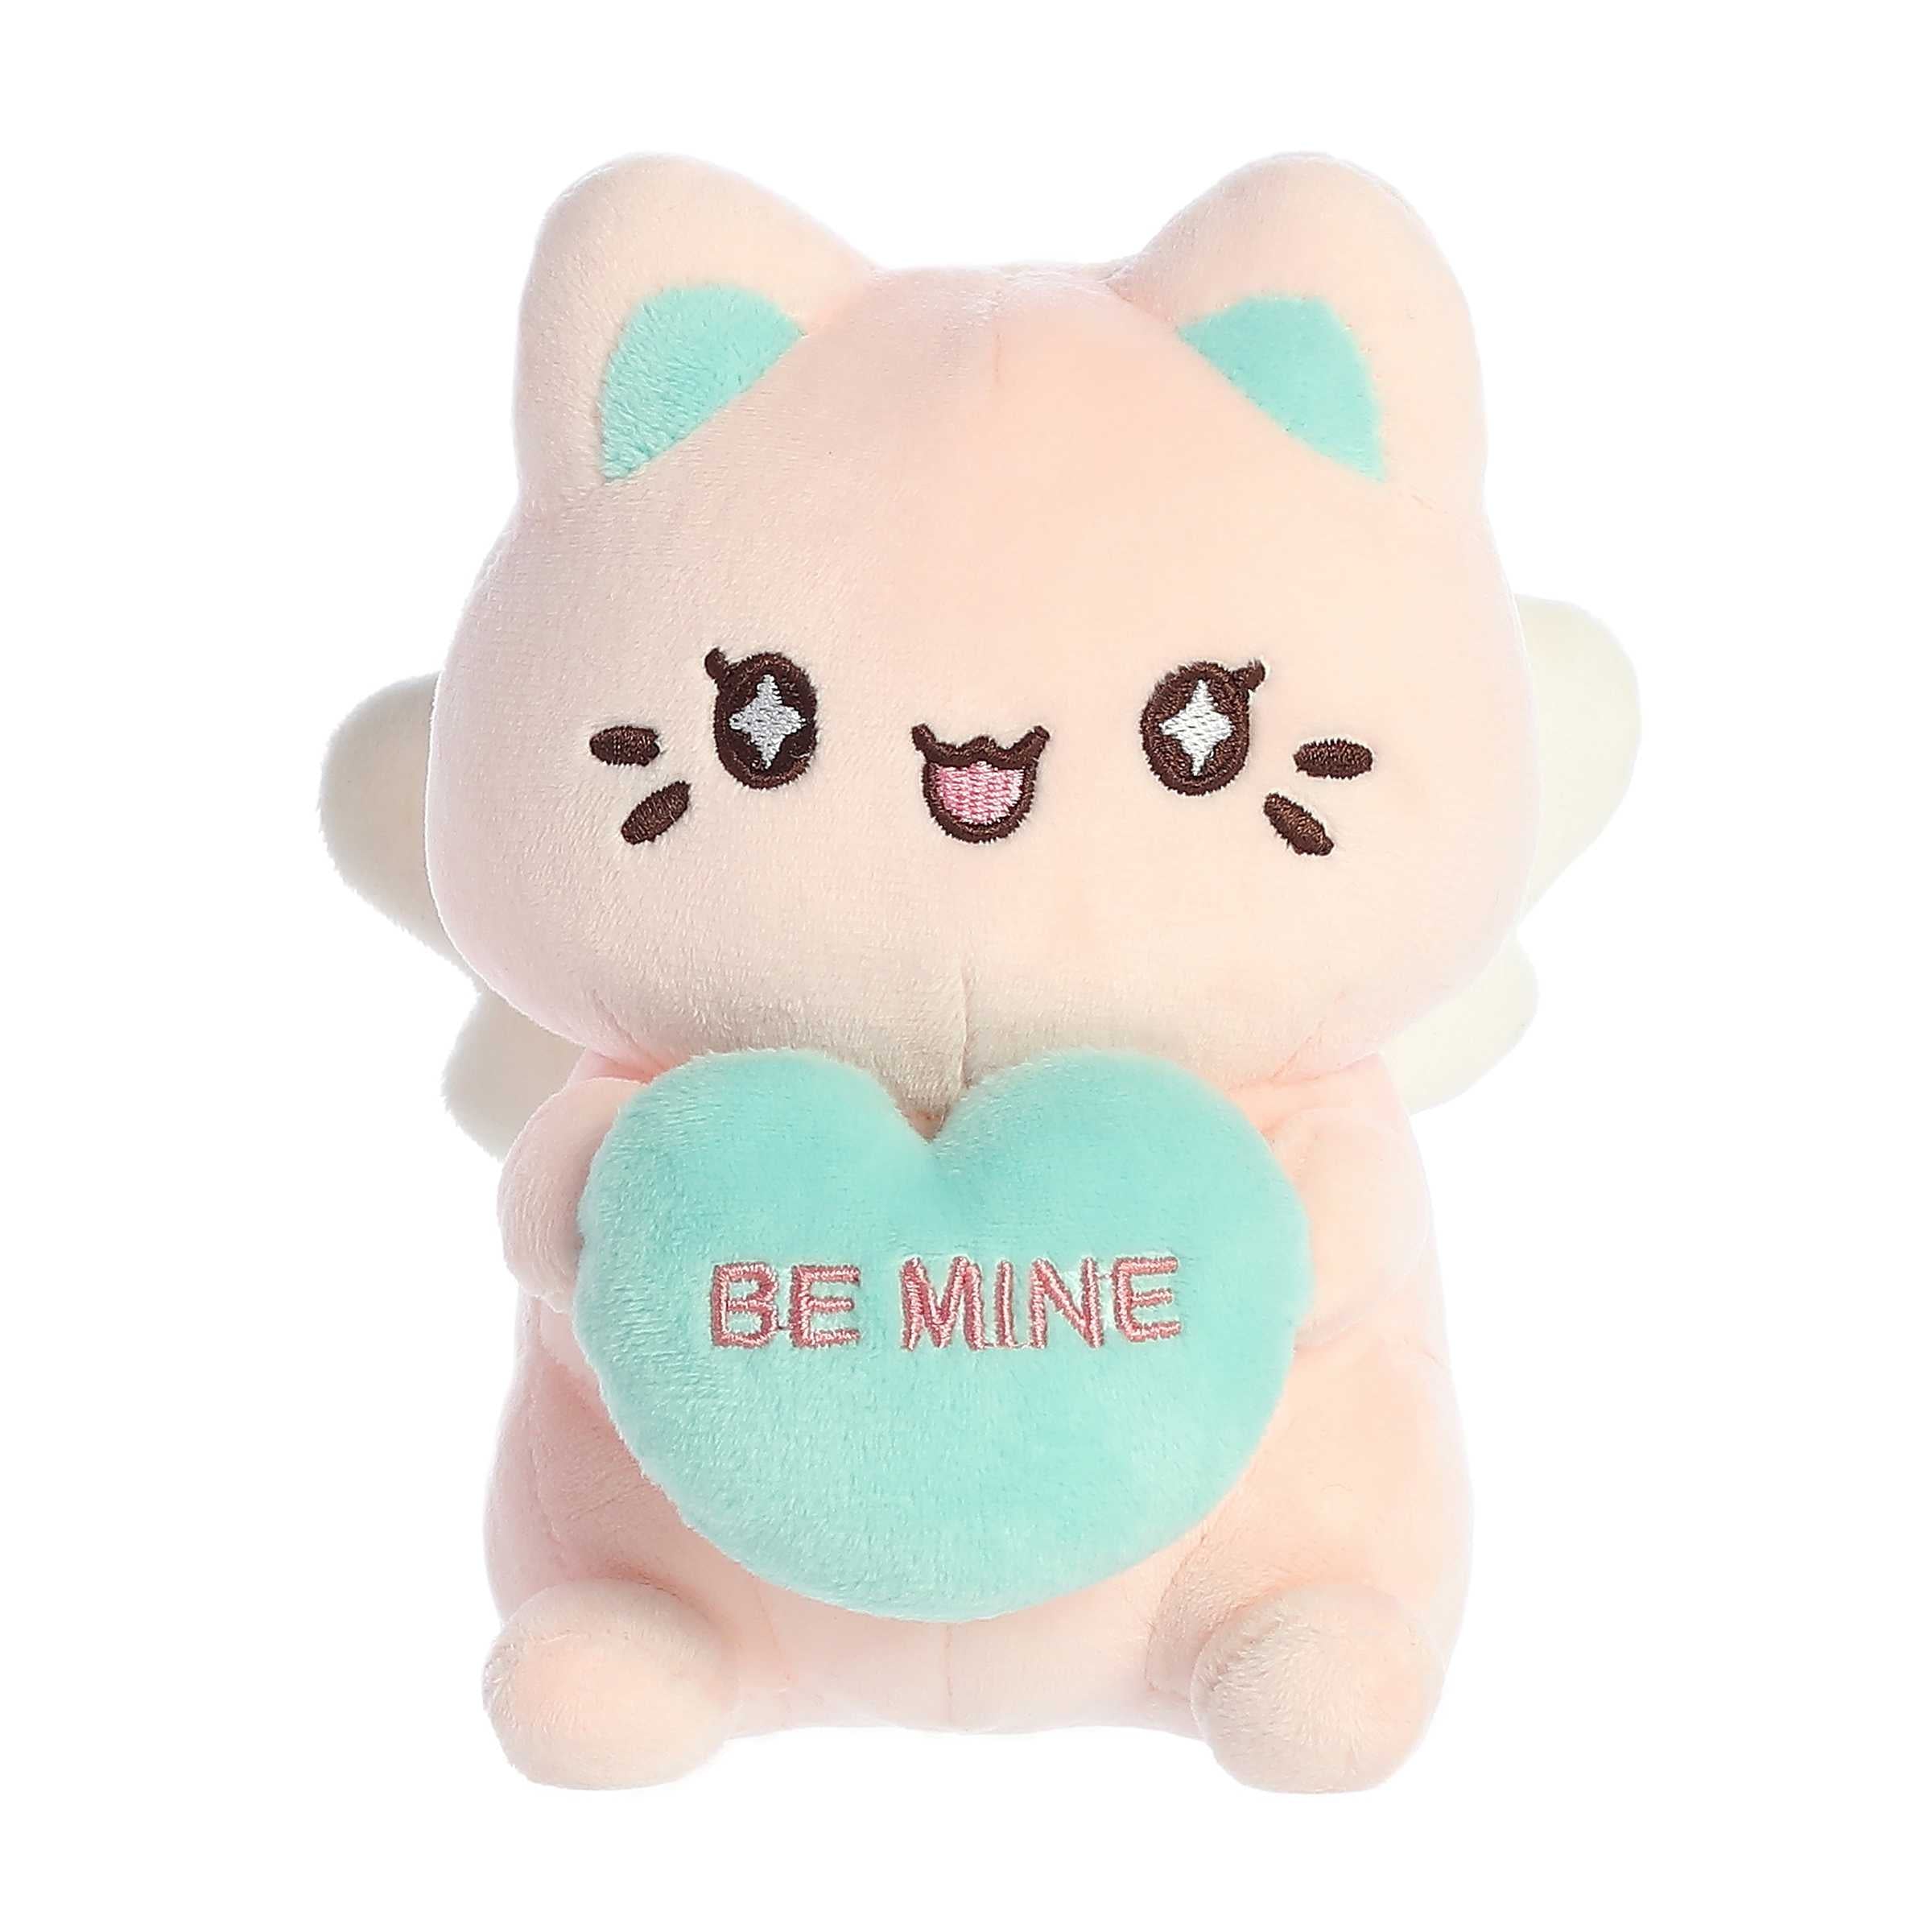 Pink Candy Heart Sitting Mewochi with angel wings holding "Be Mine" candy heart, from Tasty Peach Valentine plush collection